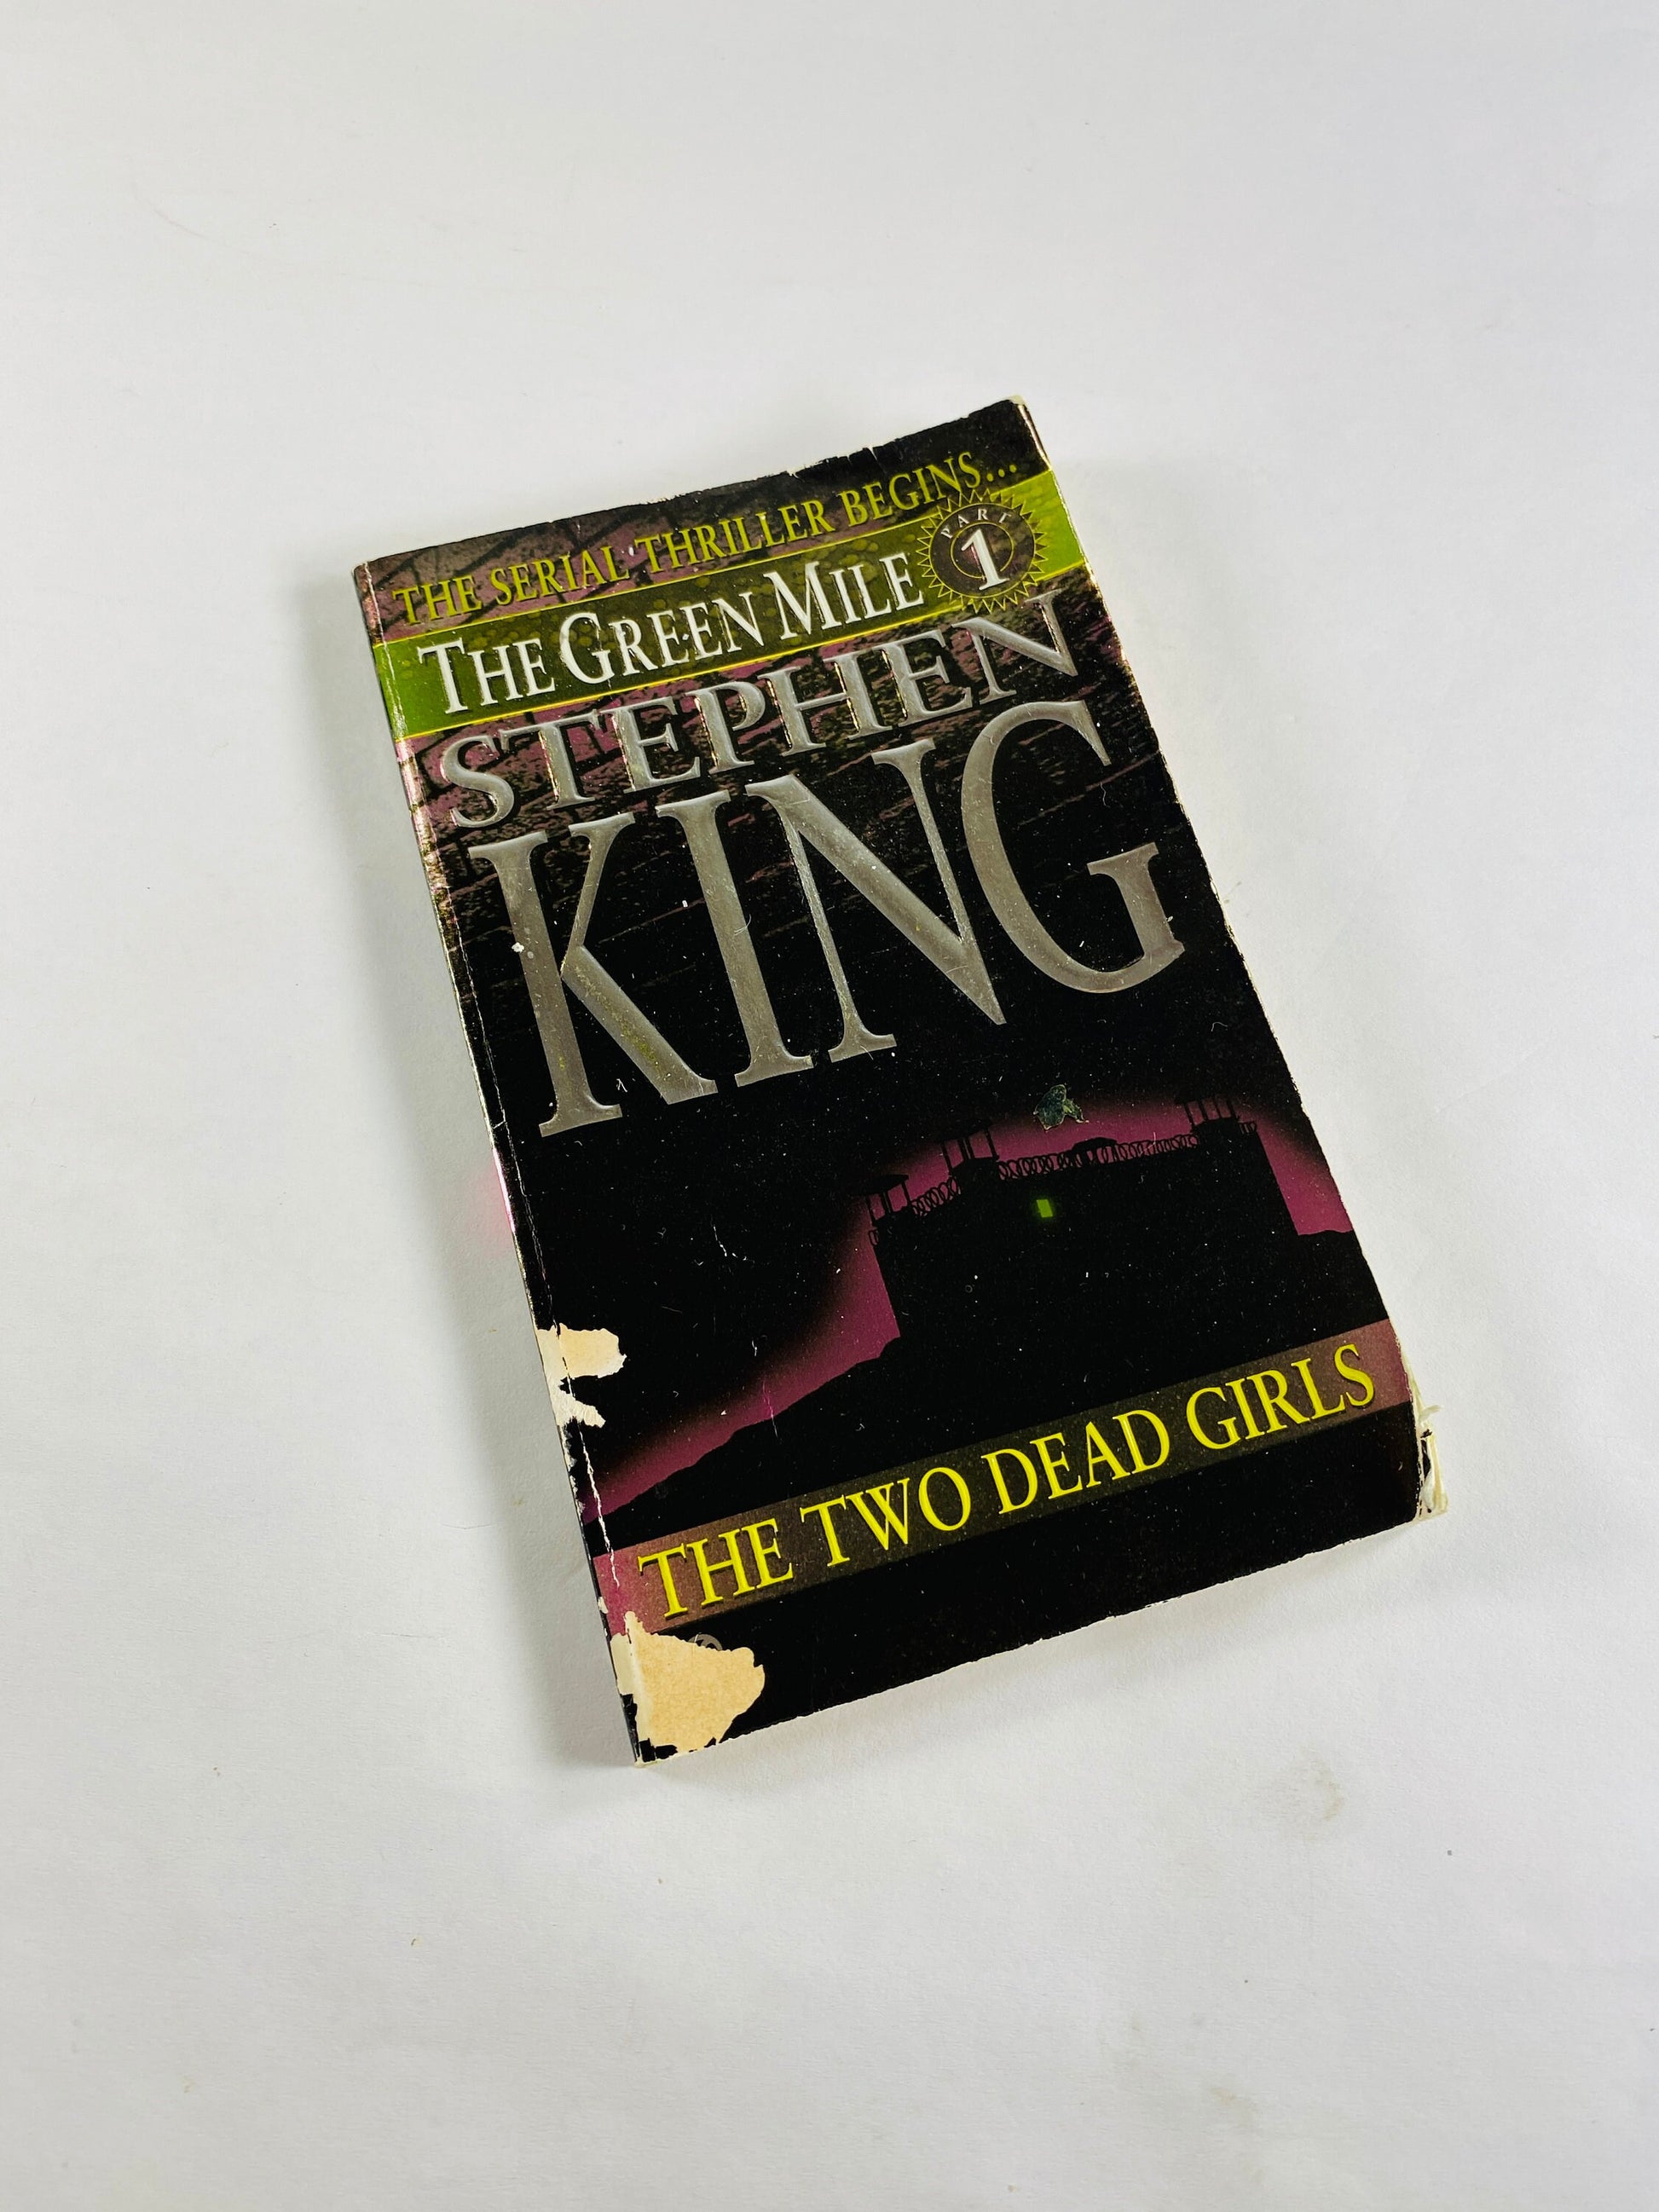 Green Mile Two Dead Girls by Stephen King Vintage paperback book circa 1996 about the a Death Row inmate with healing abilities